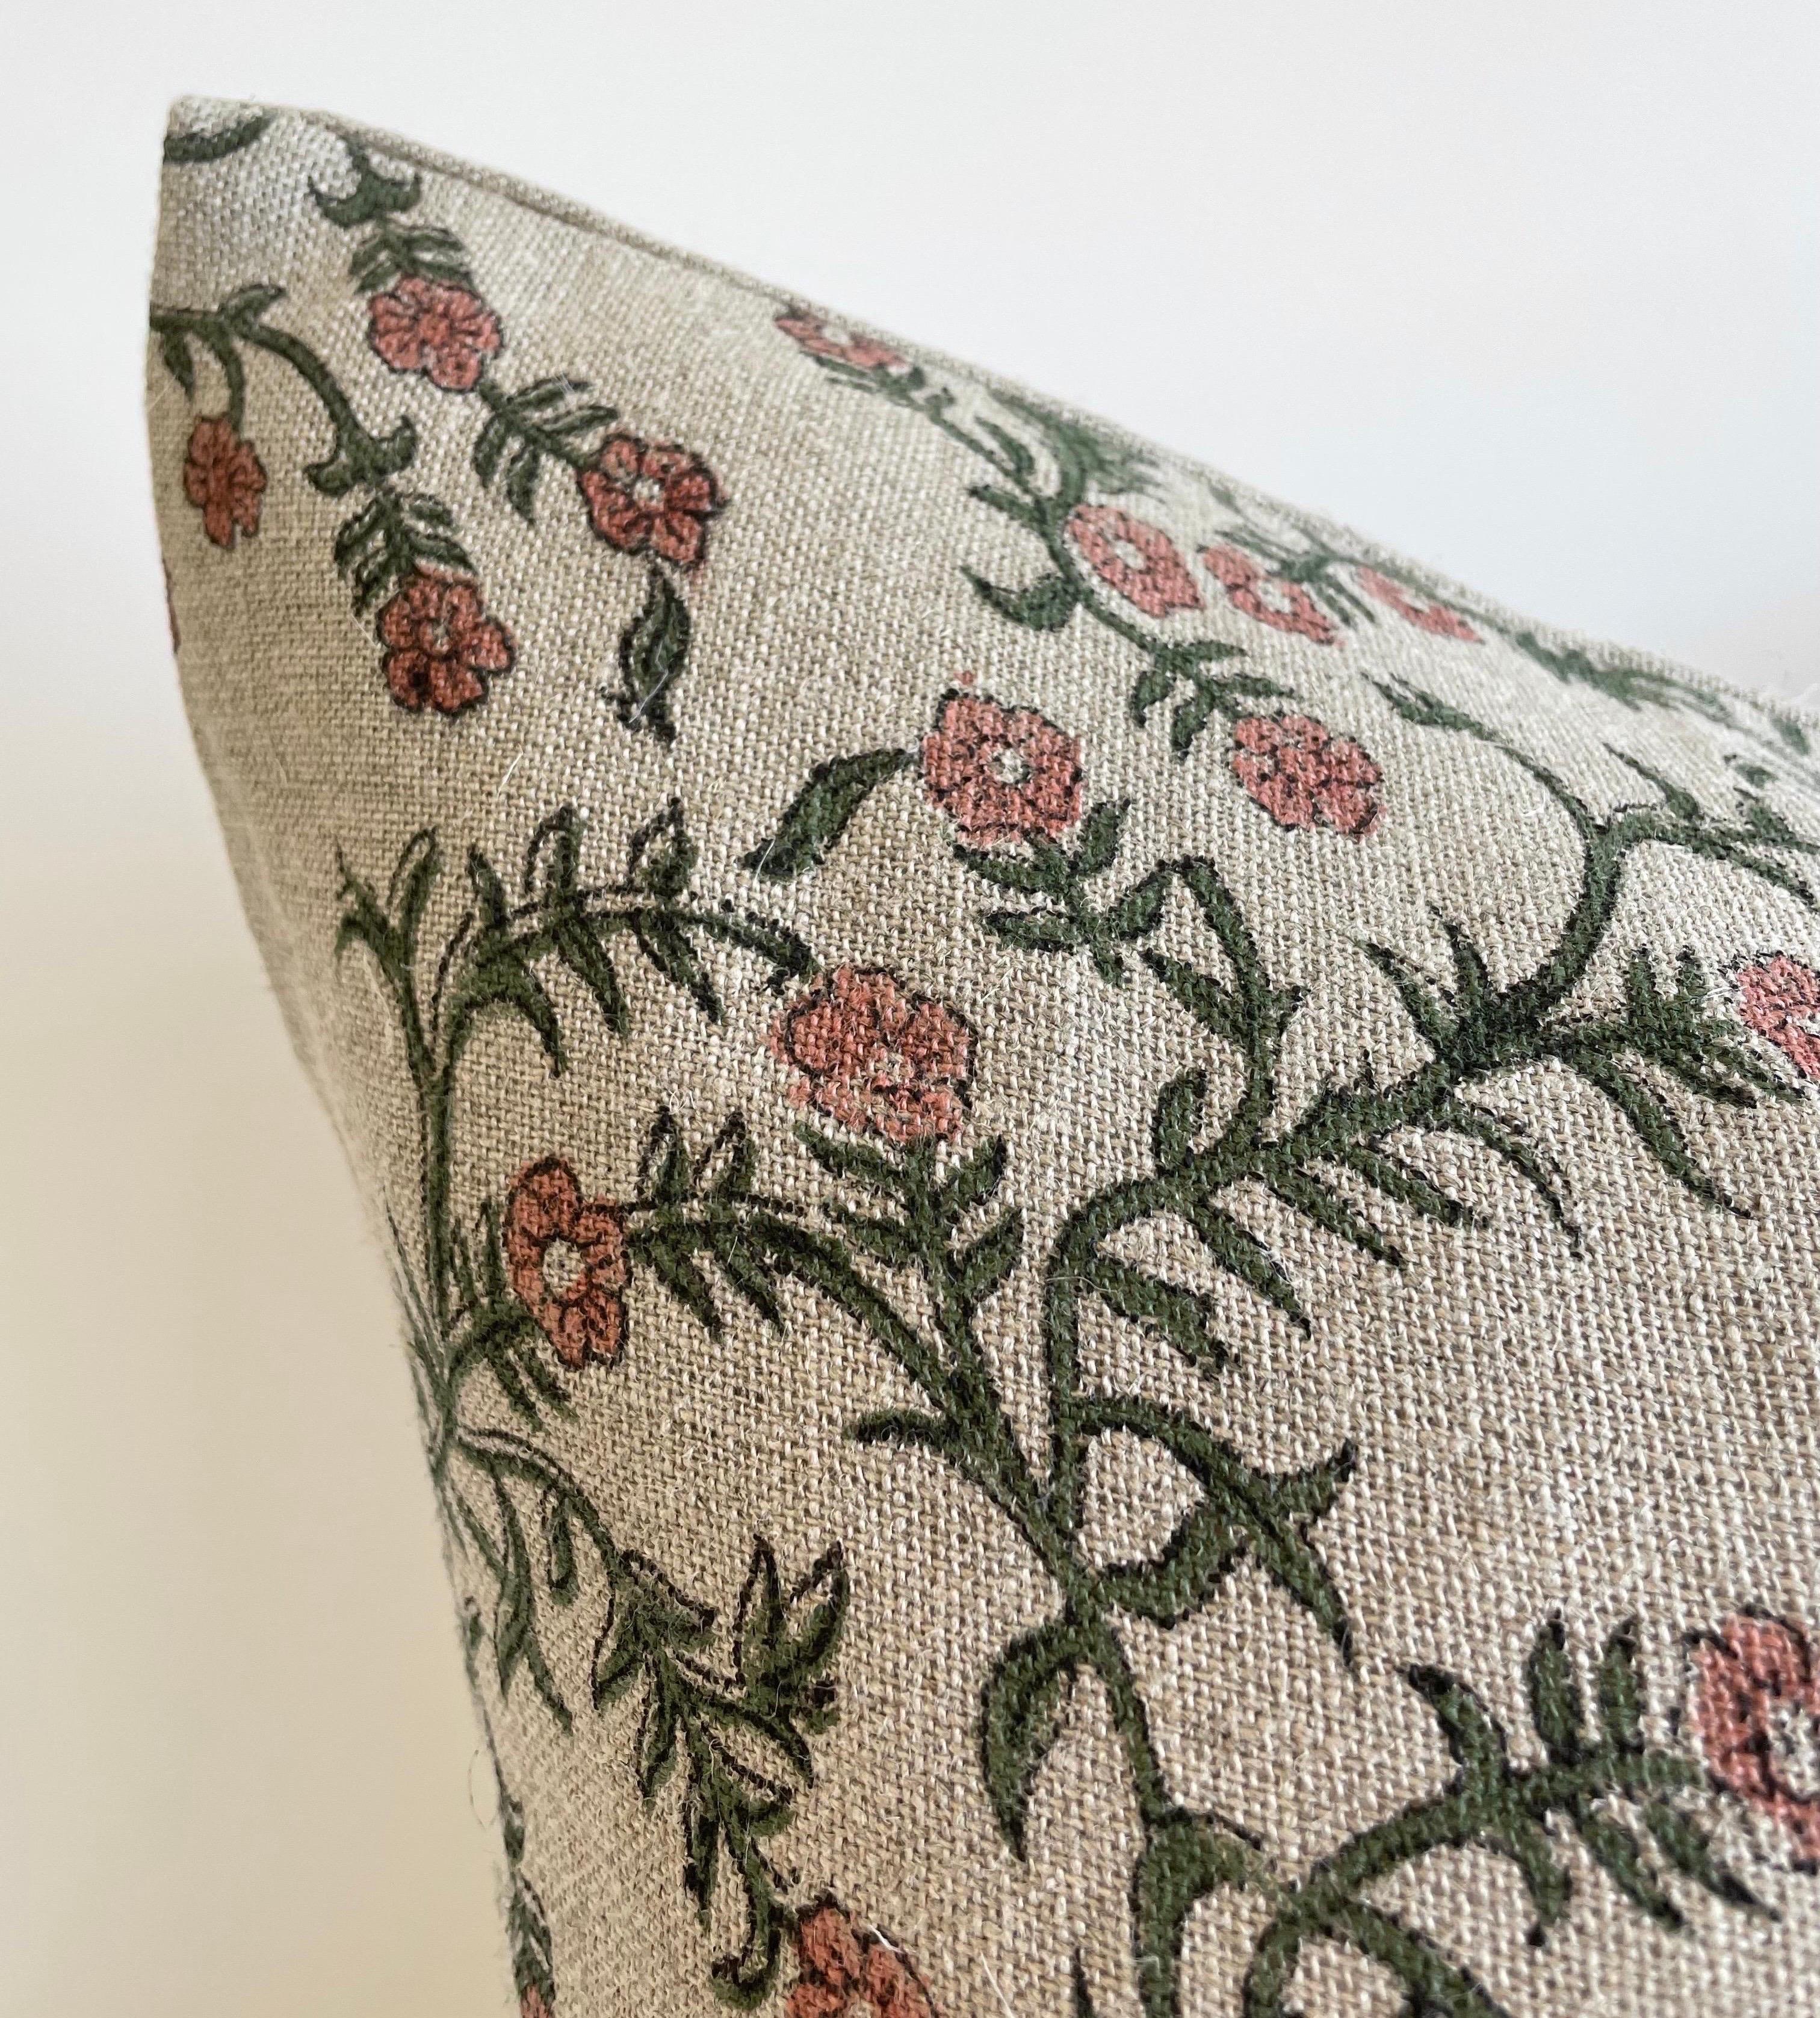 Beautifully hand block-printed pillow on linen fabric. Zipper closure. Care instructions: Dry clean recommended
Size: 22” x 22”
Colors: Flax linen, coral, dark chartreuse.